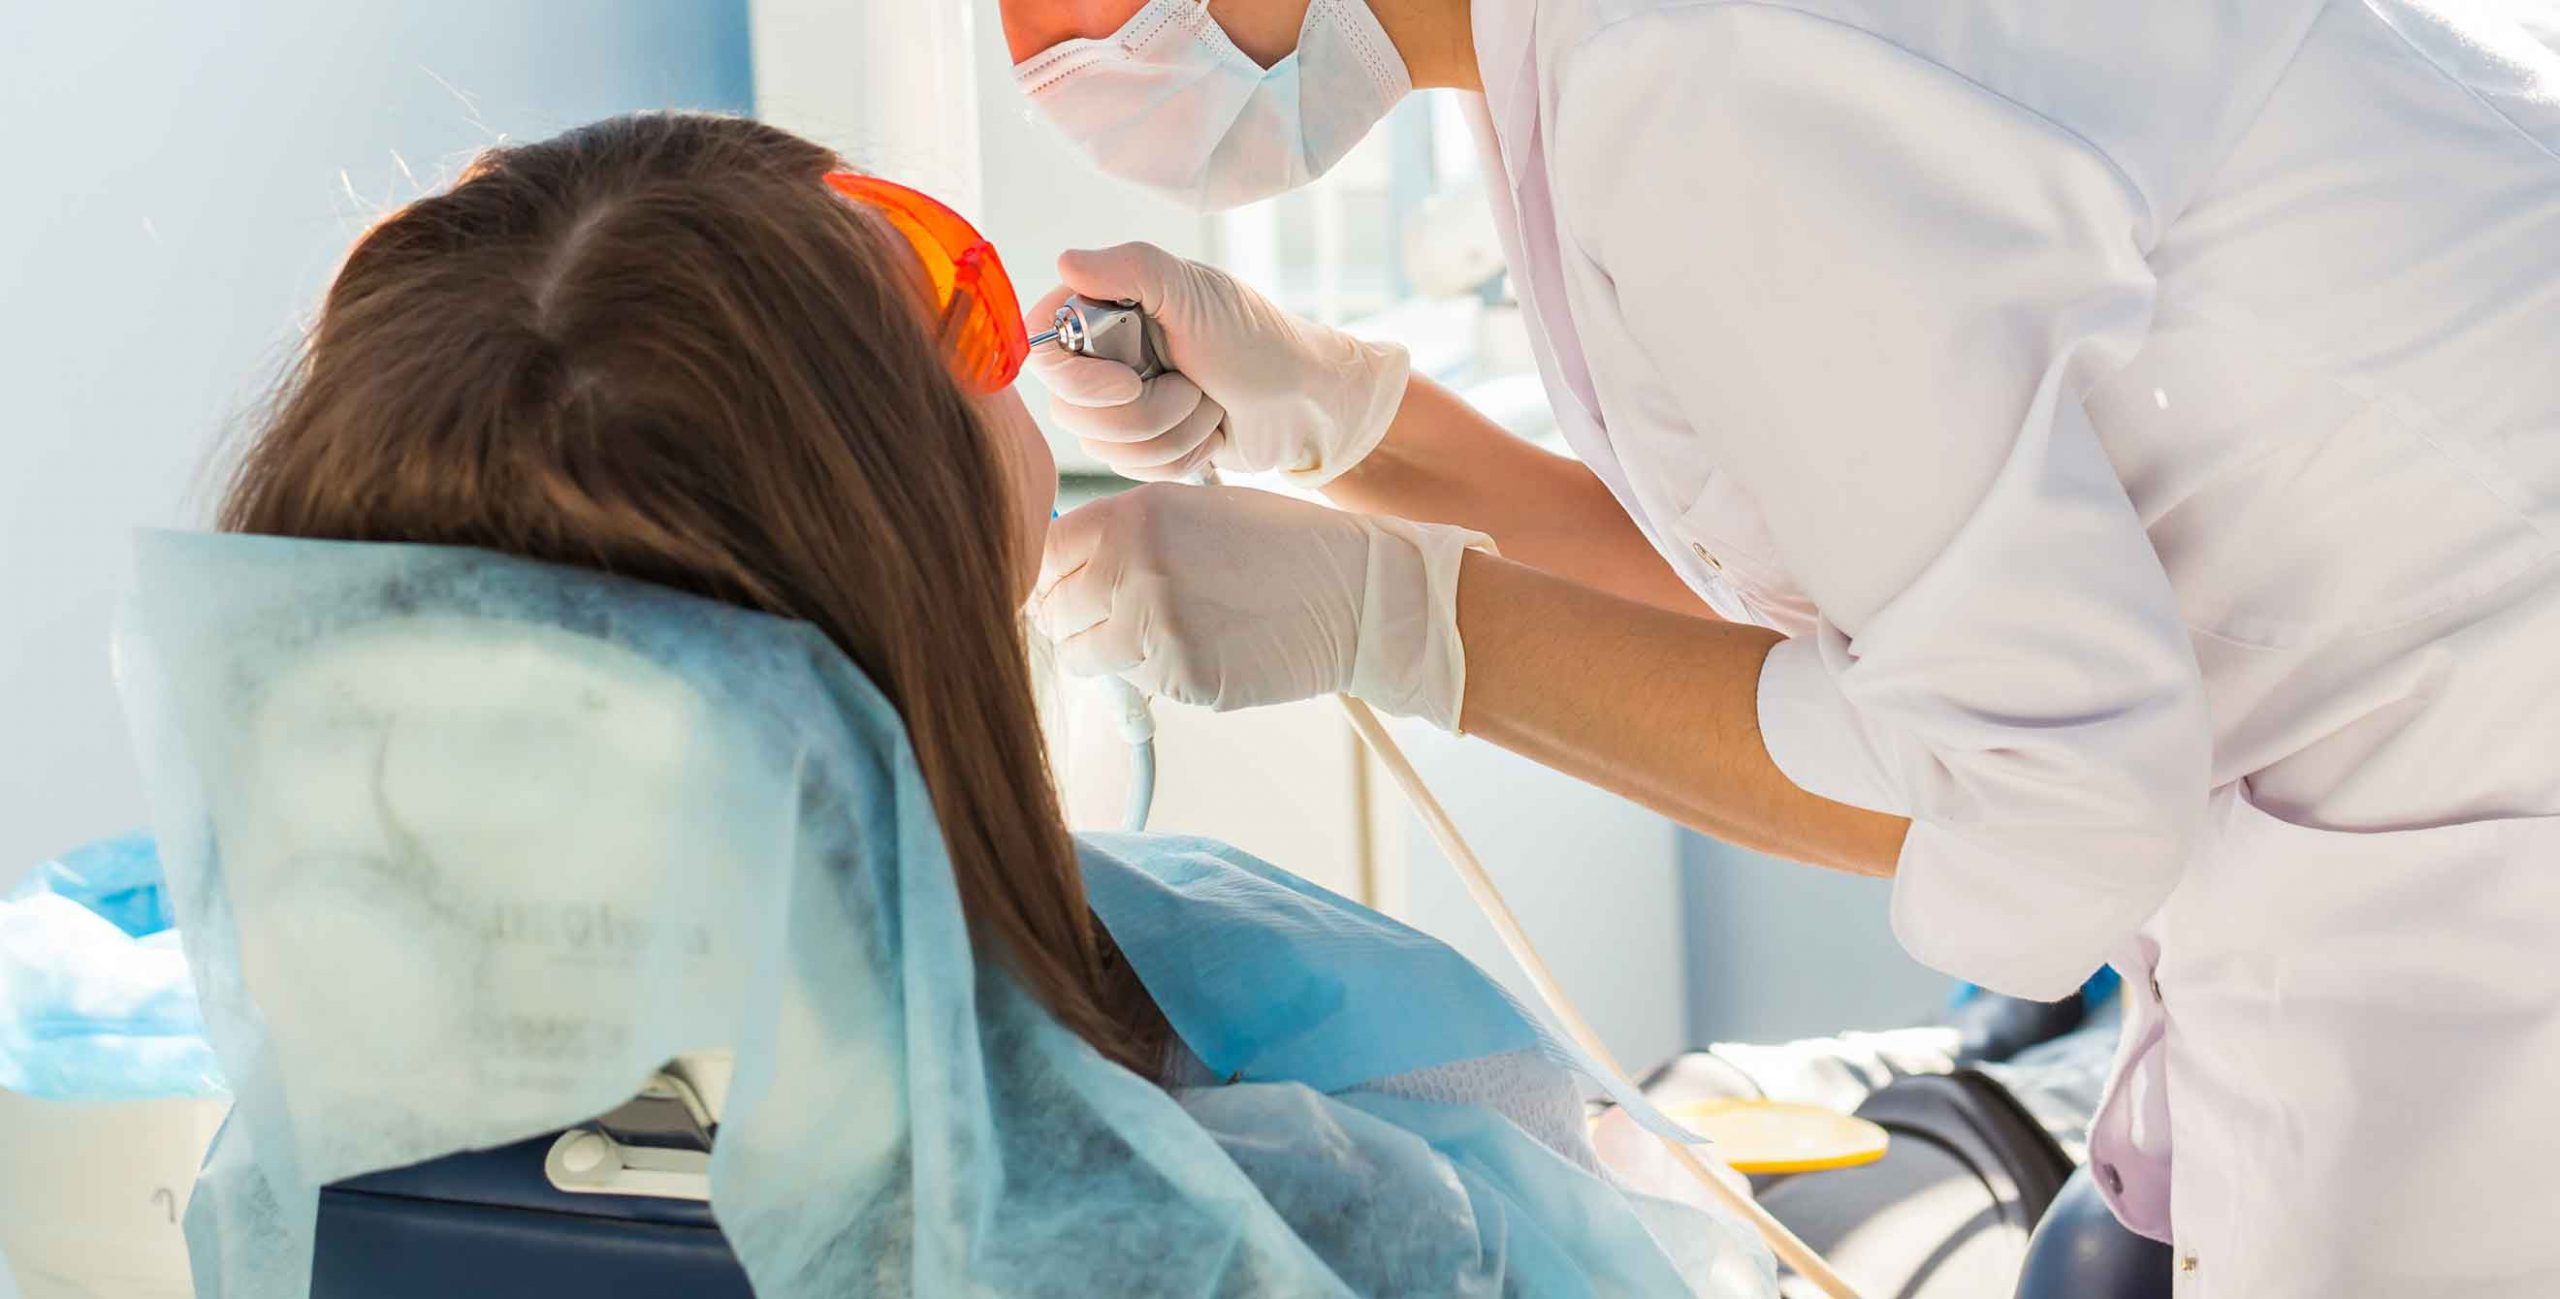 Under a new West Virginia law, the state's Medicaid program will cover adult dental care, providing up to $1,000 in non-cosmetic dental services per adult enrollee, per year.